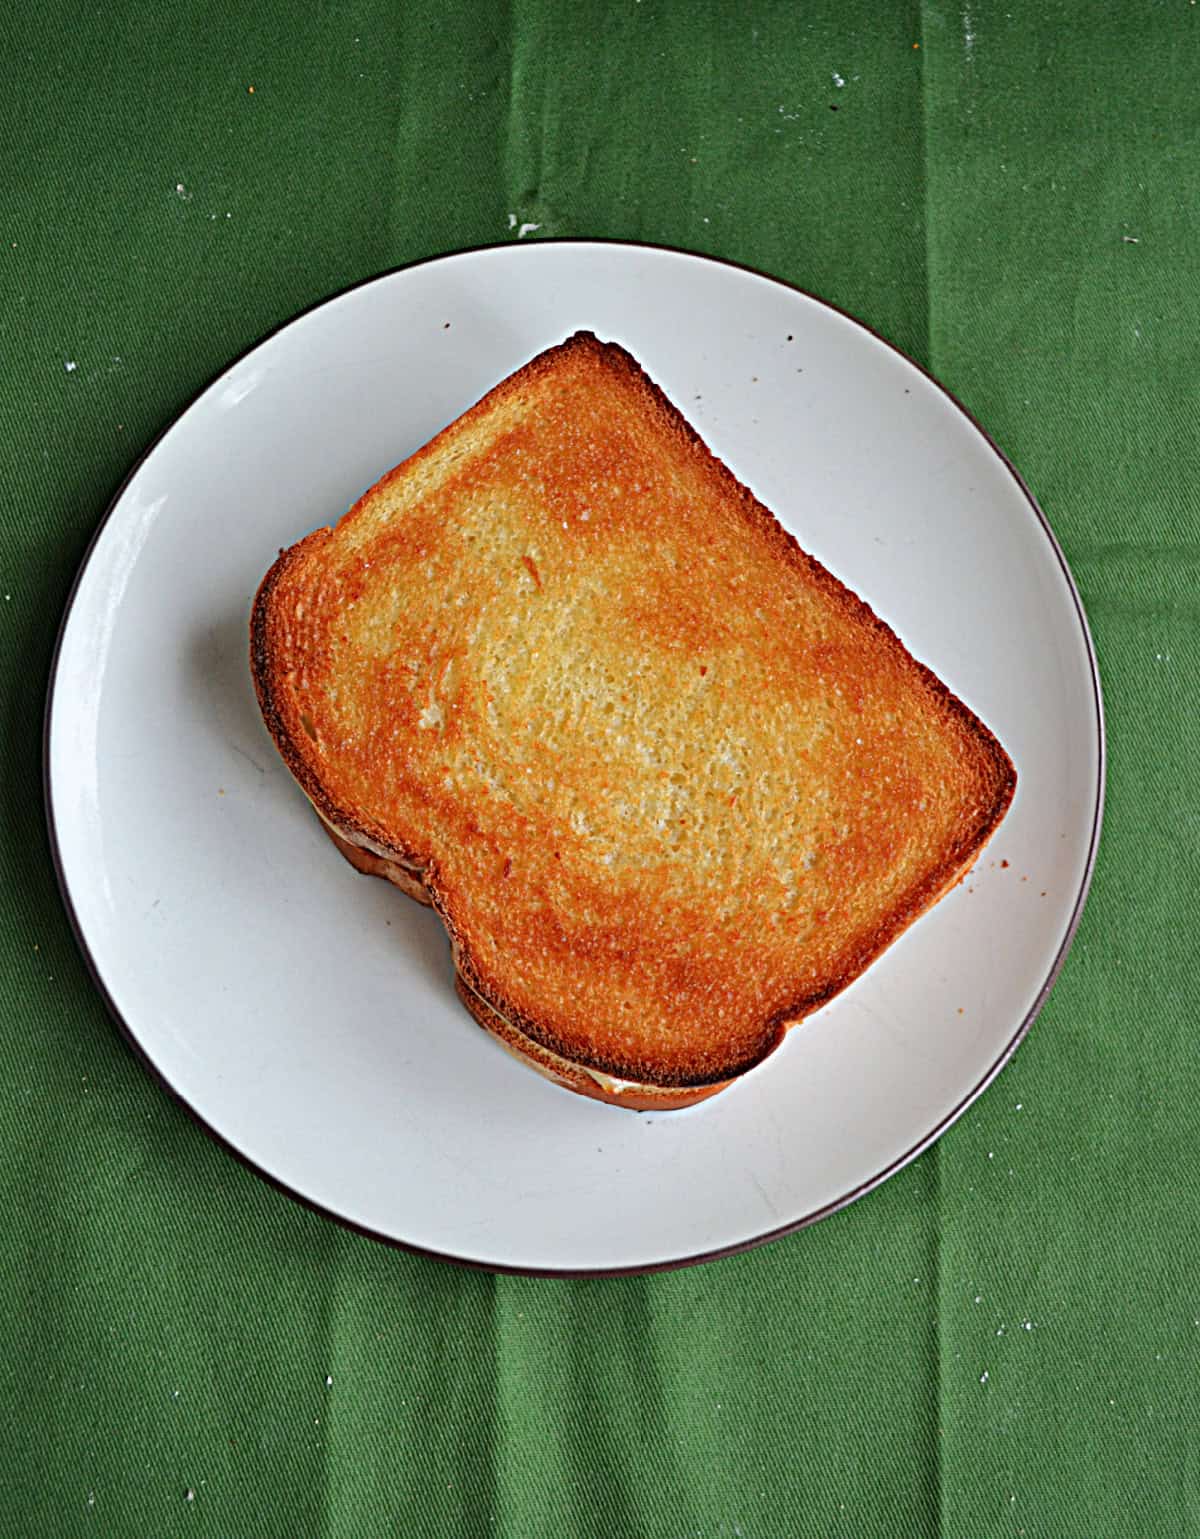 A plate with a grilled cheese sandwich on it.